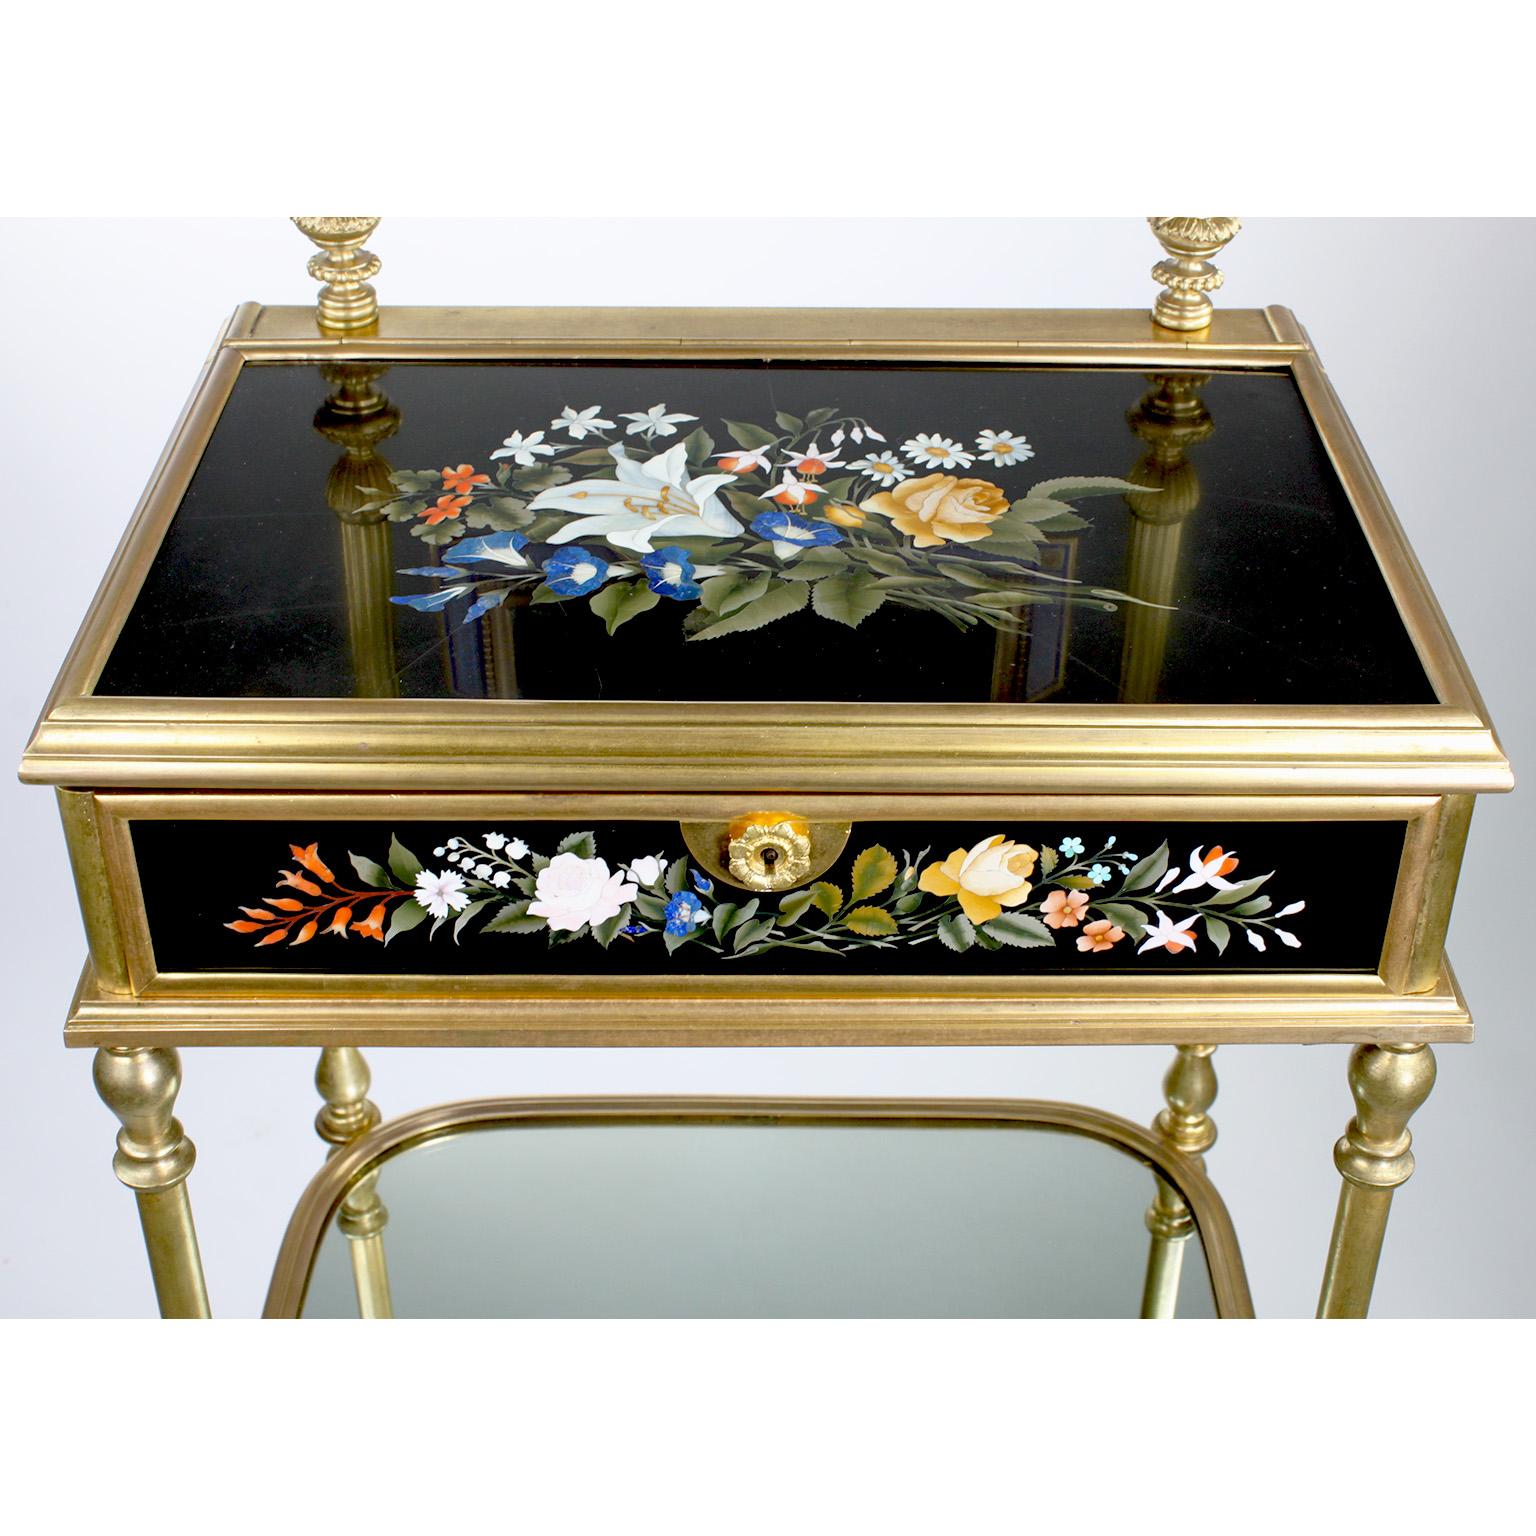 Enameled French 19th Century Gilt-Bronze and Pietra Dura Vanity Stand, Attr. Tahan, Paris For Sale